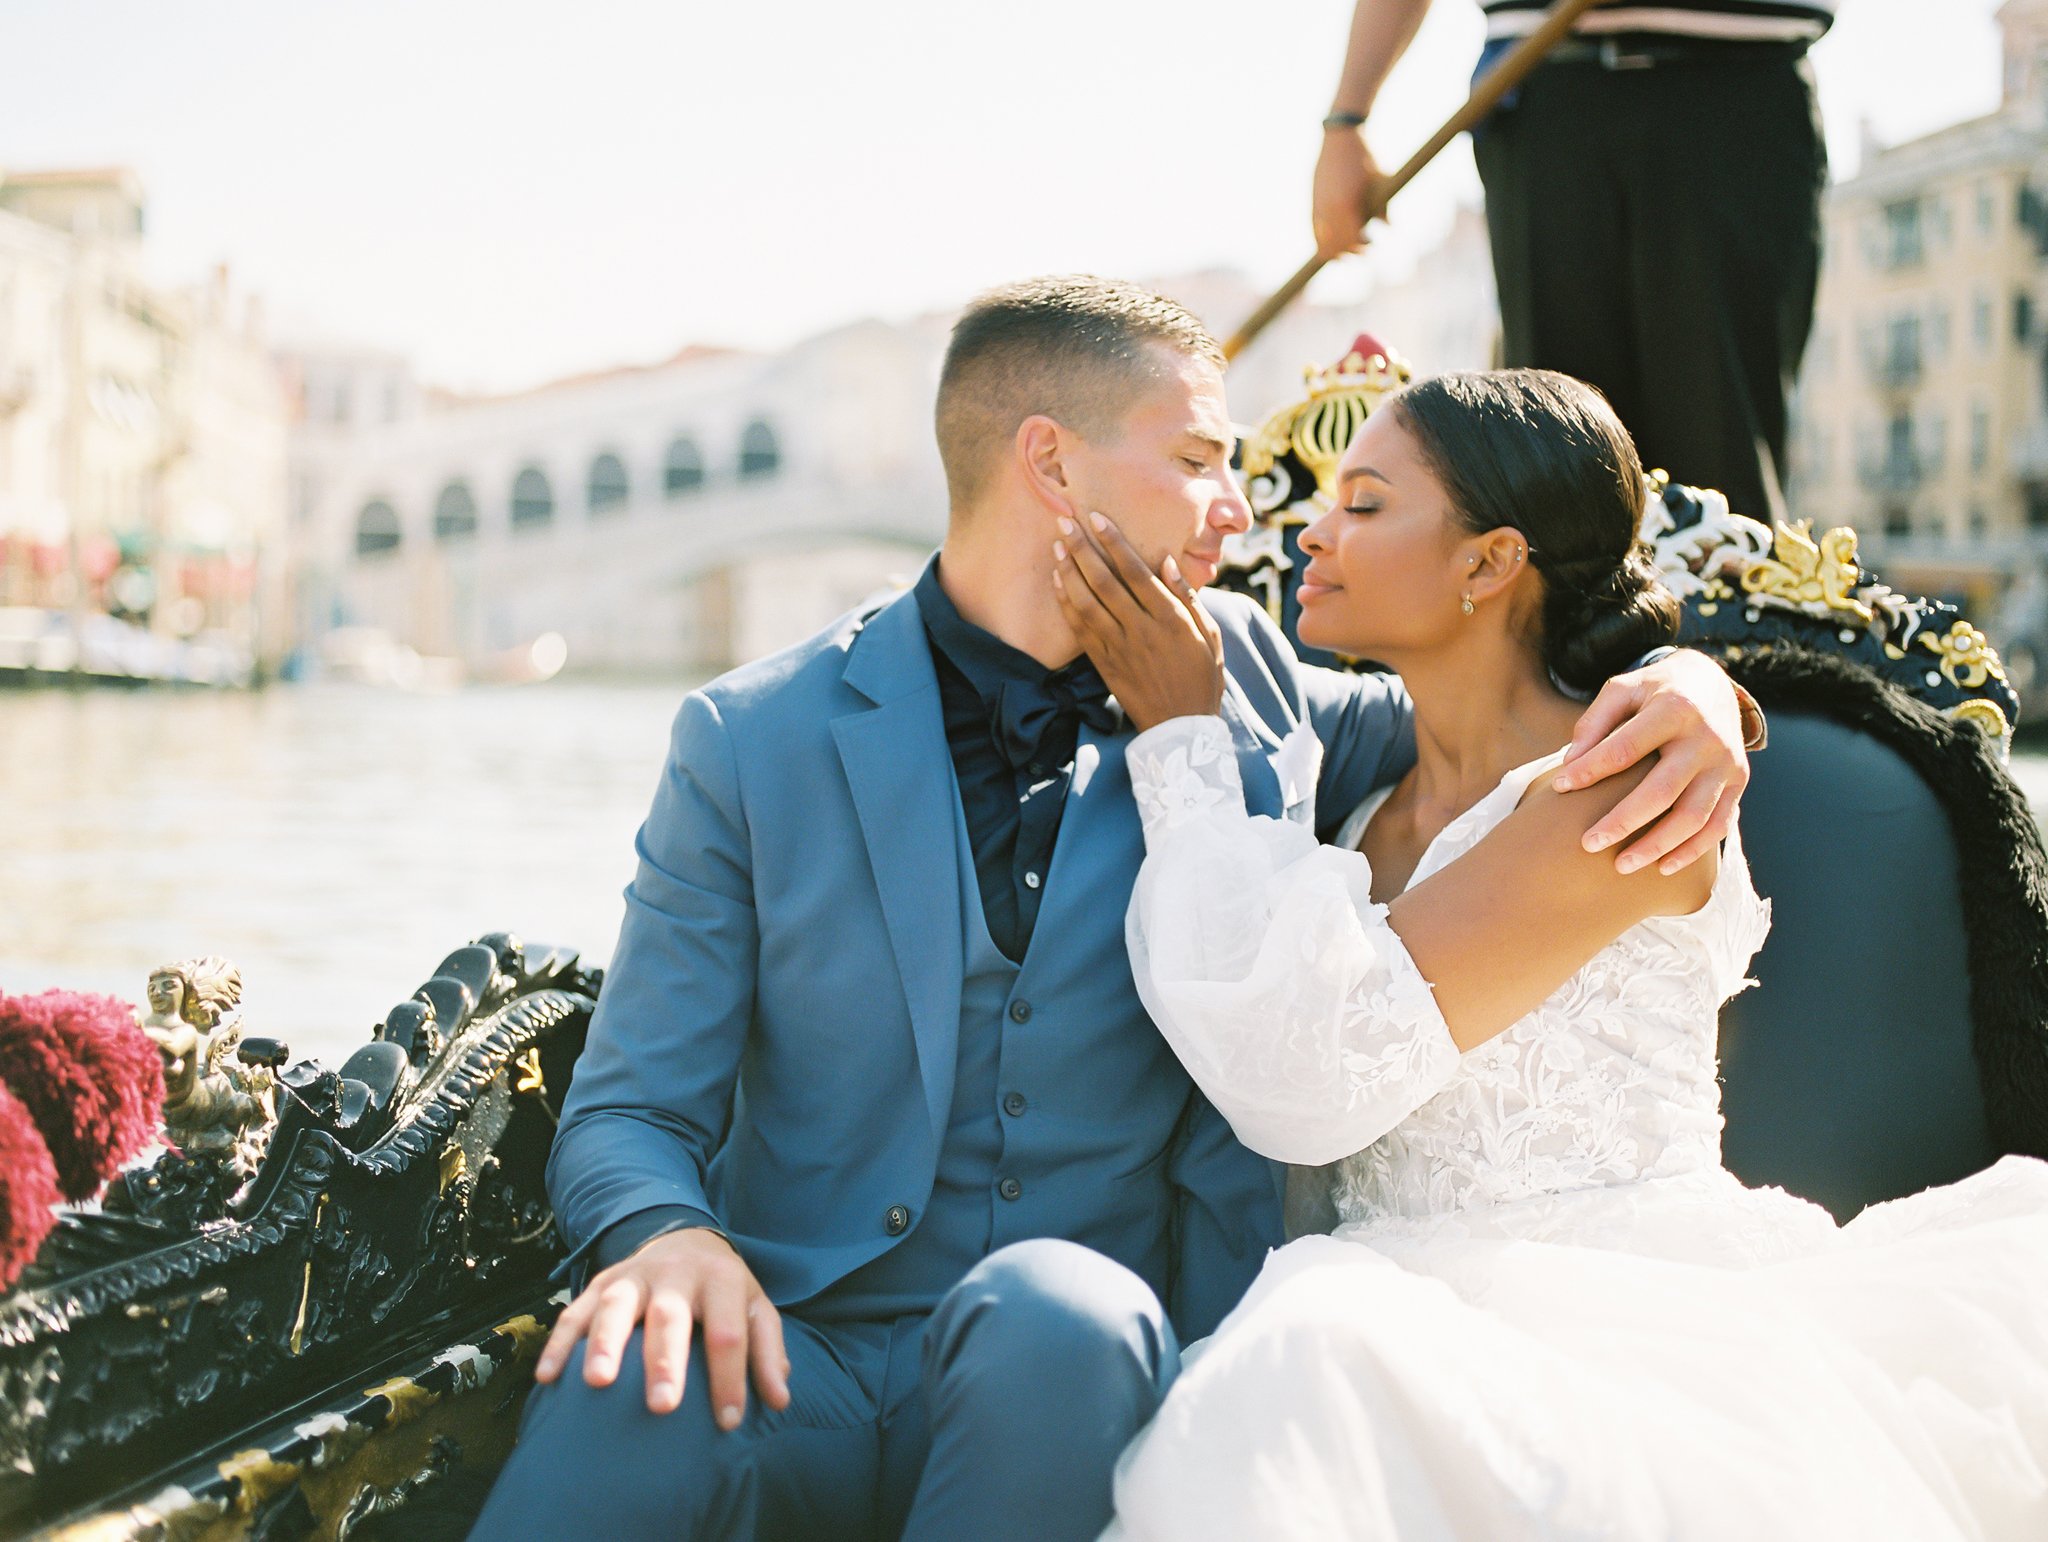 A wedding couple in gondola in one of the many venice italy canals the gondola is black with gold trimmings the groom is wearing a light blue suit with a navy shirt and bow tie the bride is wearing a lace wedding dress with sleeves and the bride is looking at the camera but the groom is leaning on the bride looking down image photographed by Kelley Williams Photography a Venice Italy wedding photographer.